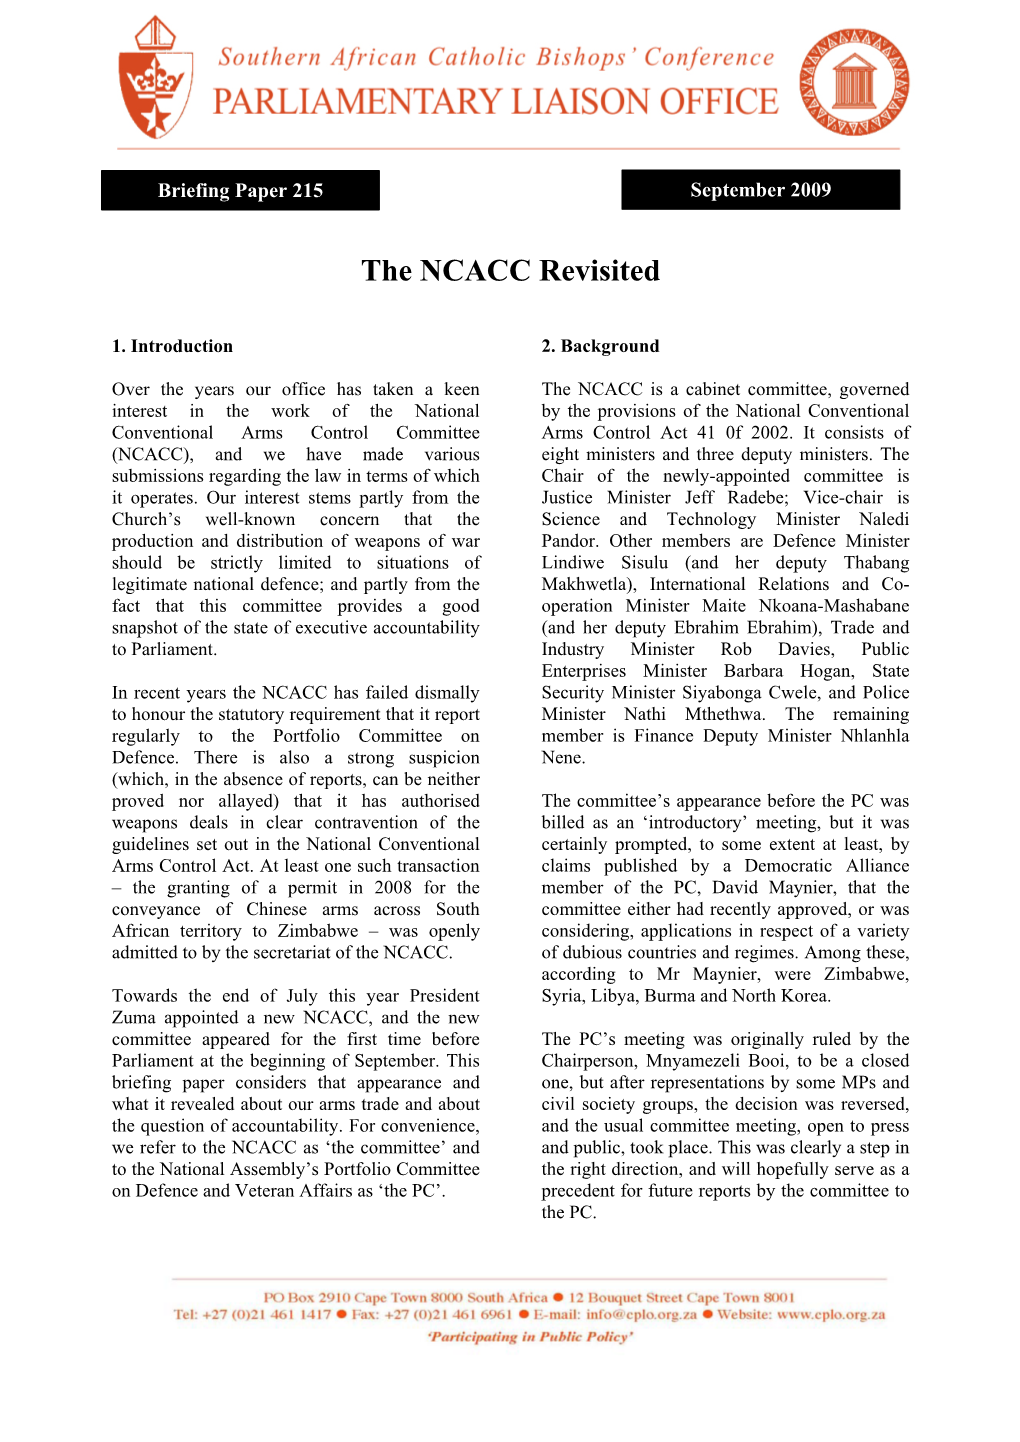 The NCACC Revisited